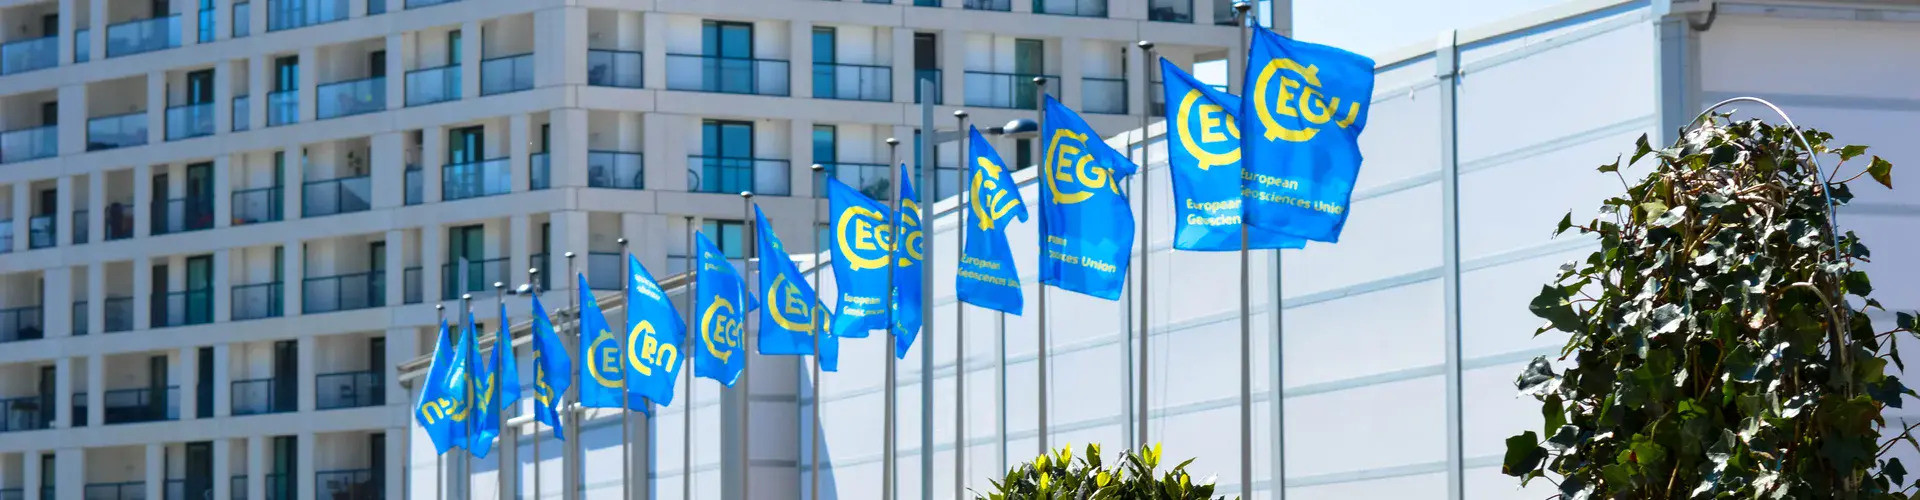 Flags outside the ACV during the EGU 2017 General Assembly (Credit: Kai Boggild/EGU)